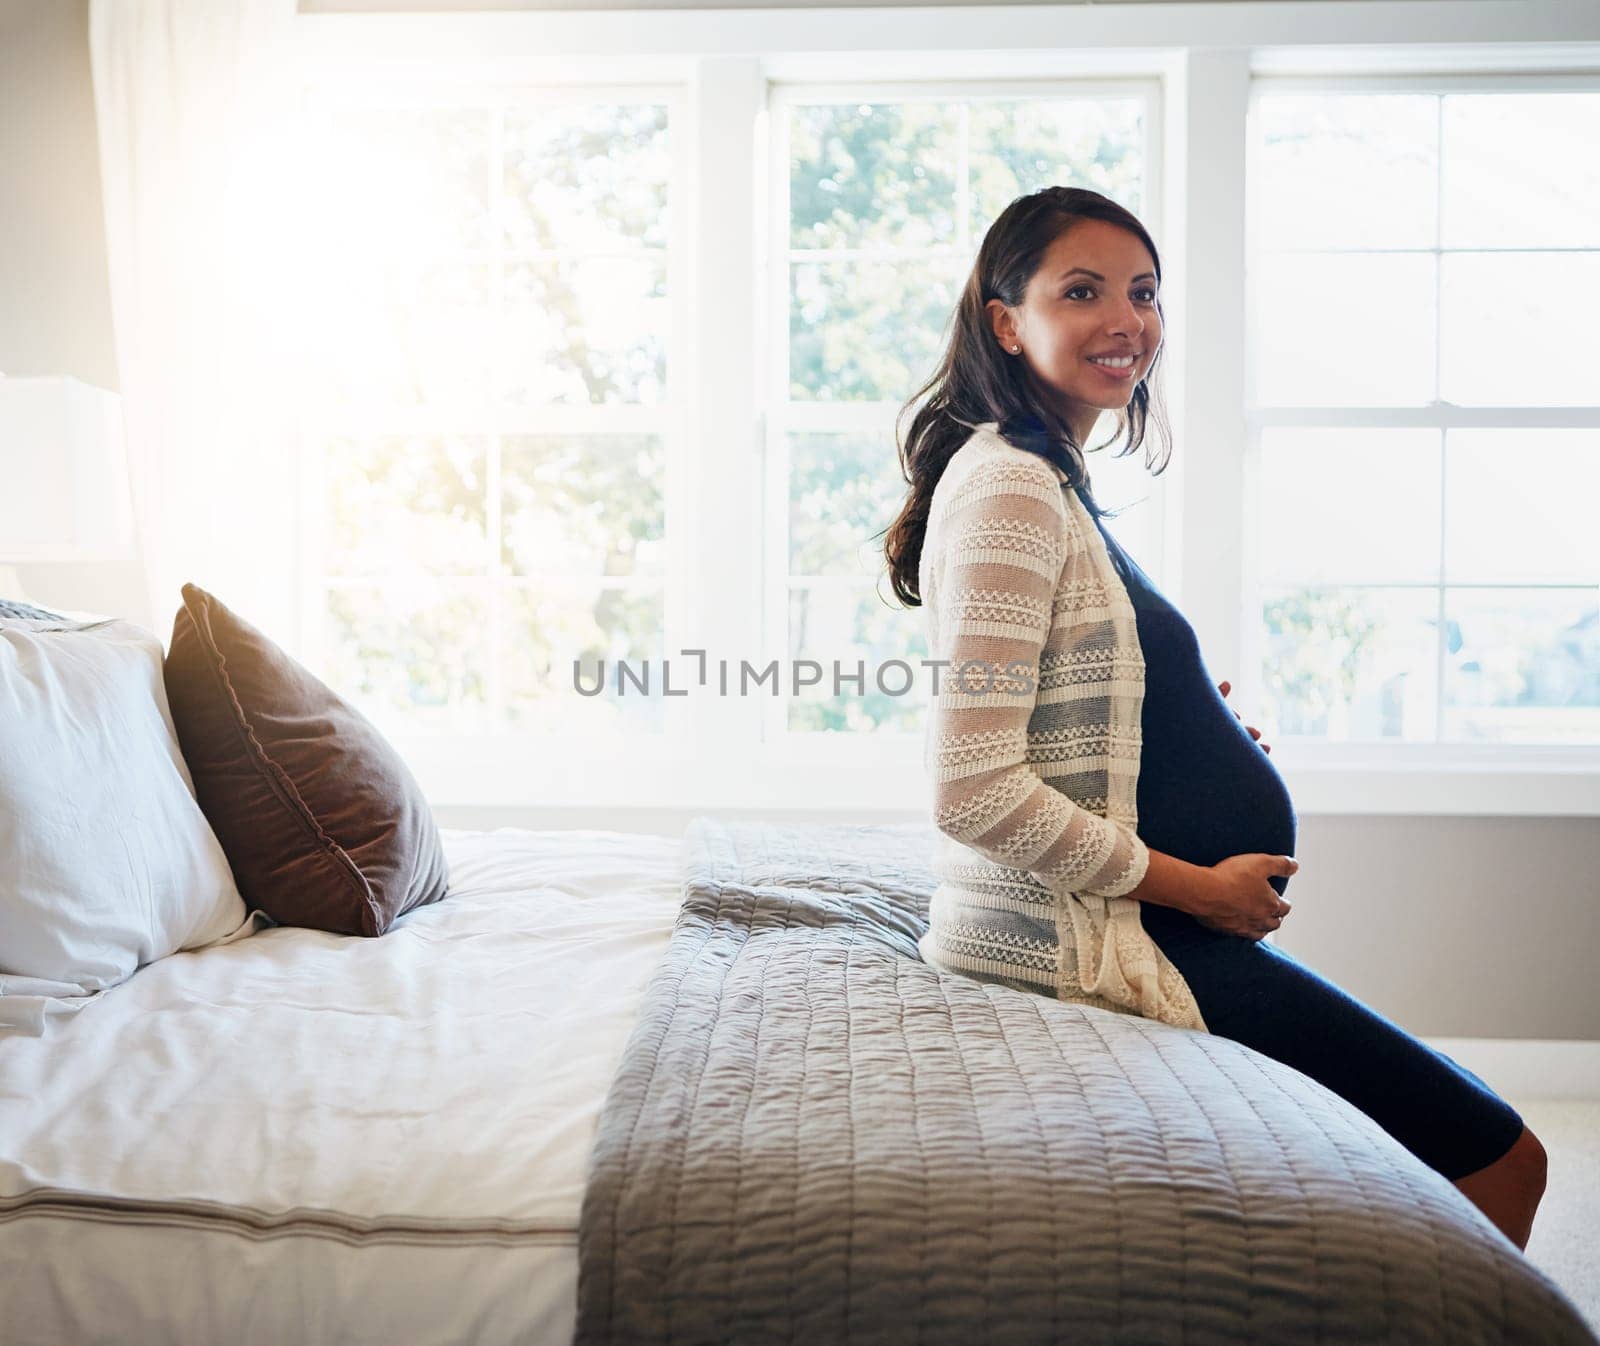 Home bedroom, happiness and woman pregnancy, massage stomach, abdomen or mom happy for baby development. Mama expectation, bed and pregnant mother smile, maternity and hope for future life growth.